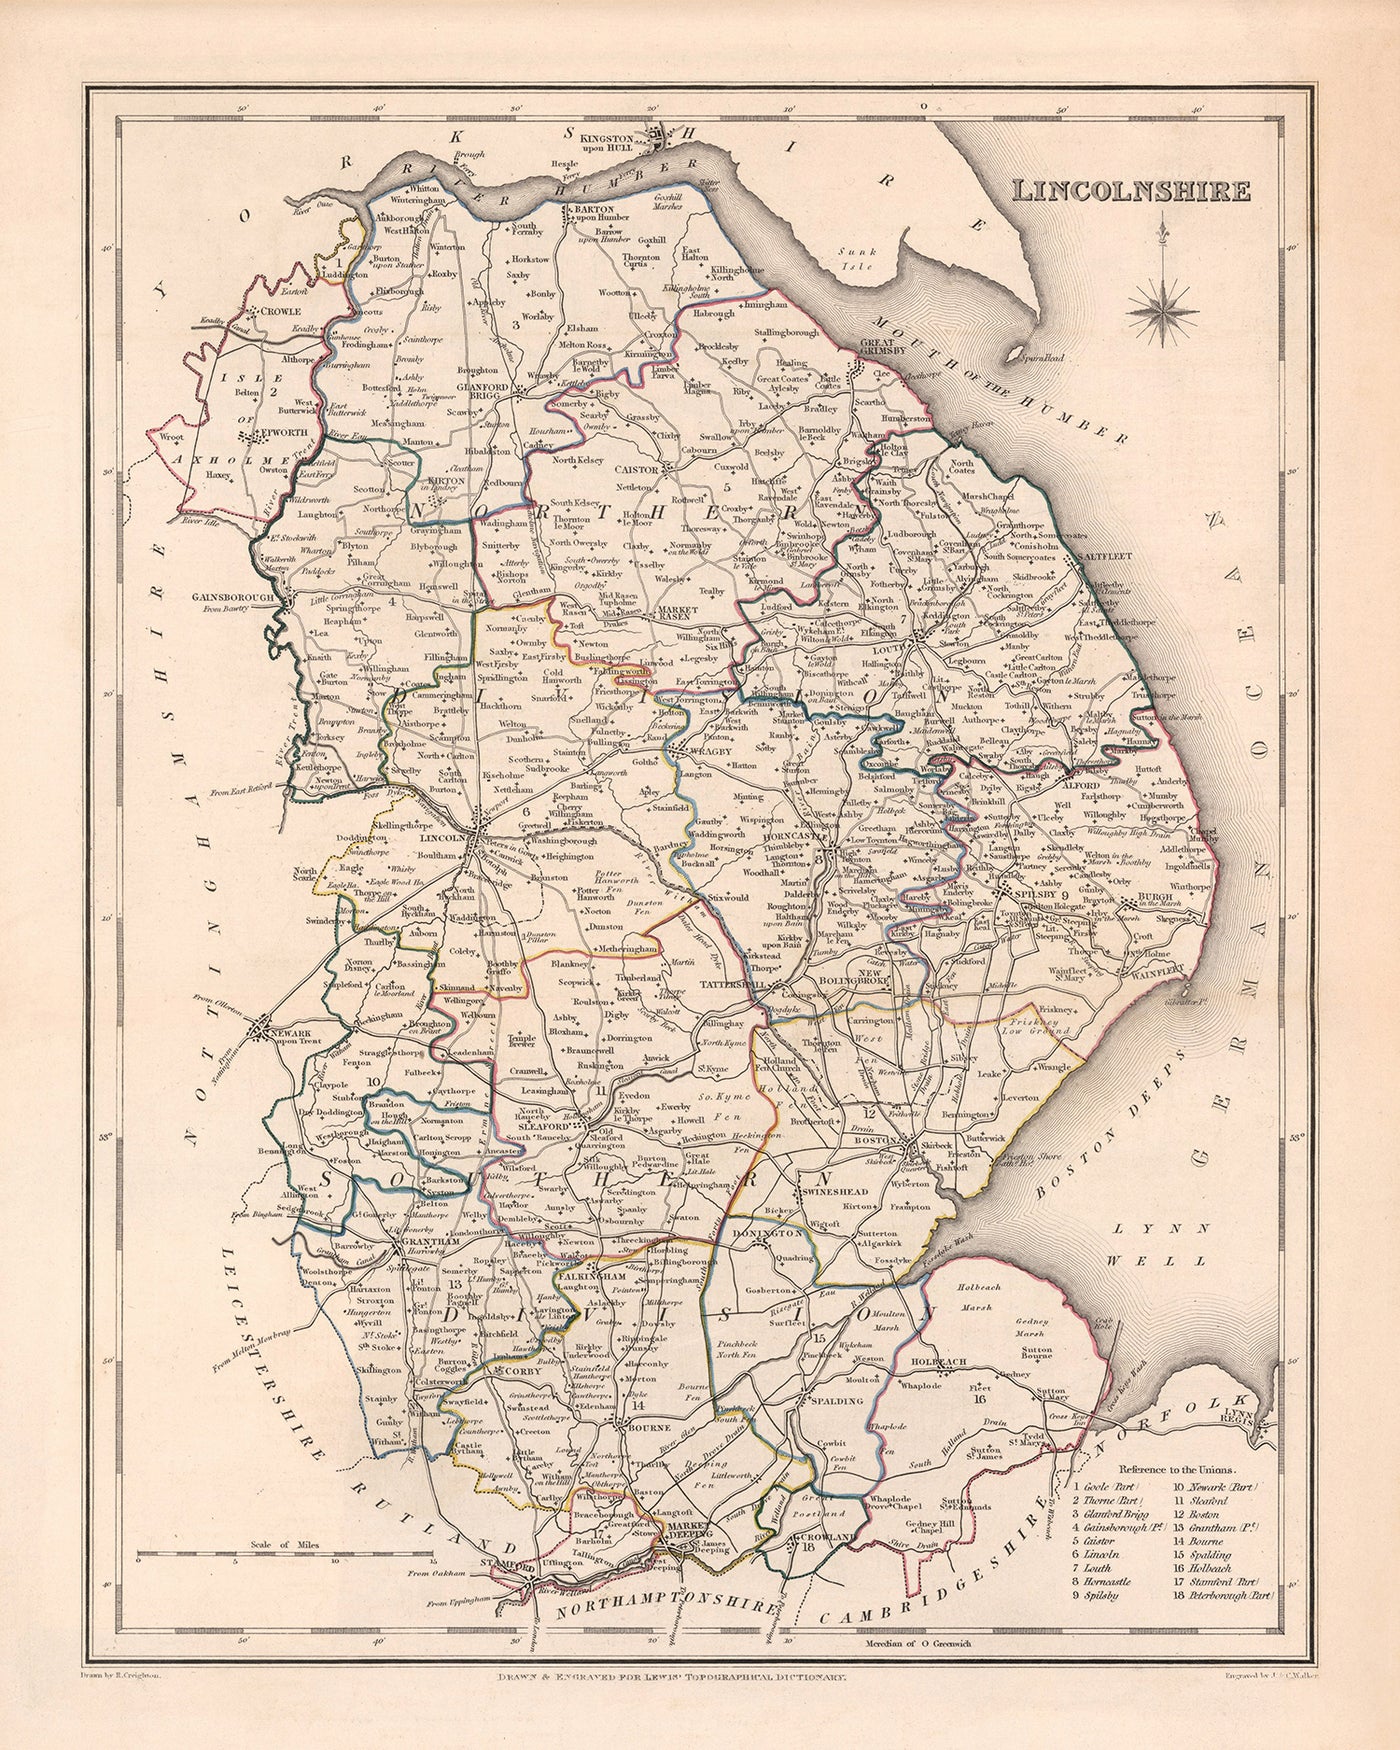 Old Map of Lincolnshire by Samuel Lewis, 1844: Boston, Grimsby, Spalding, Stamford, Louth